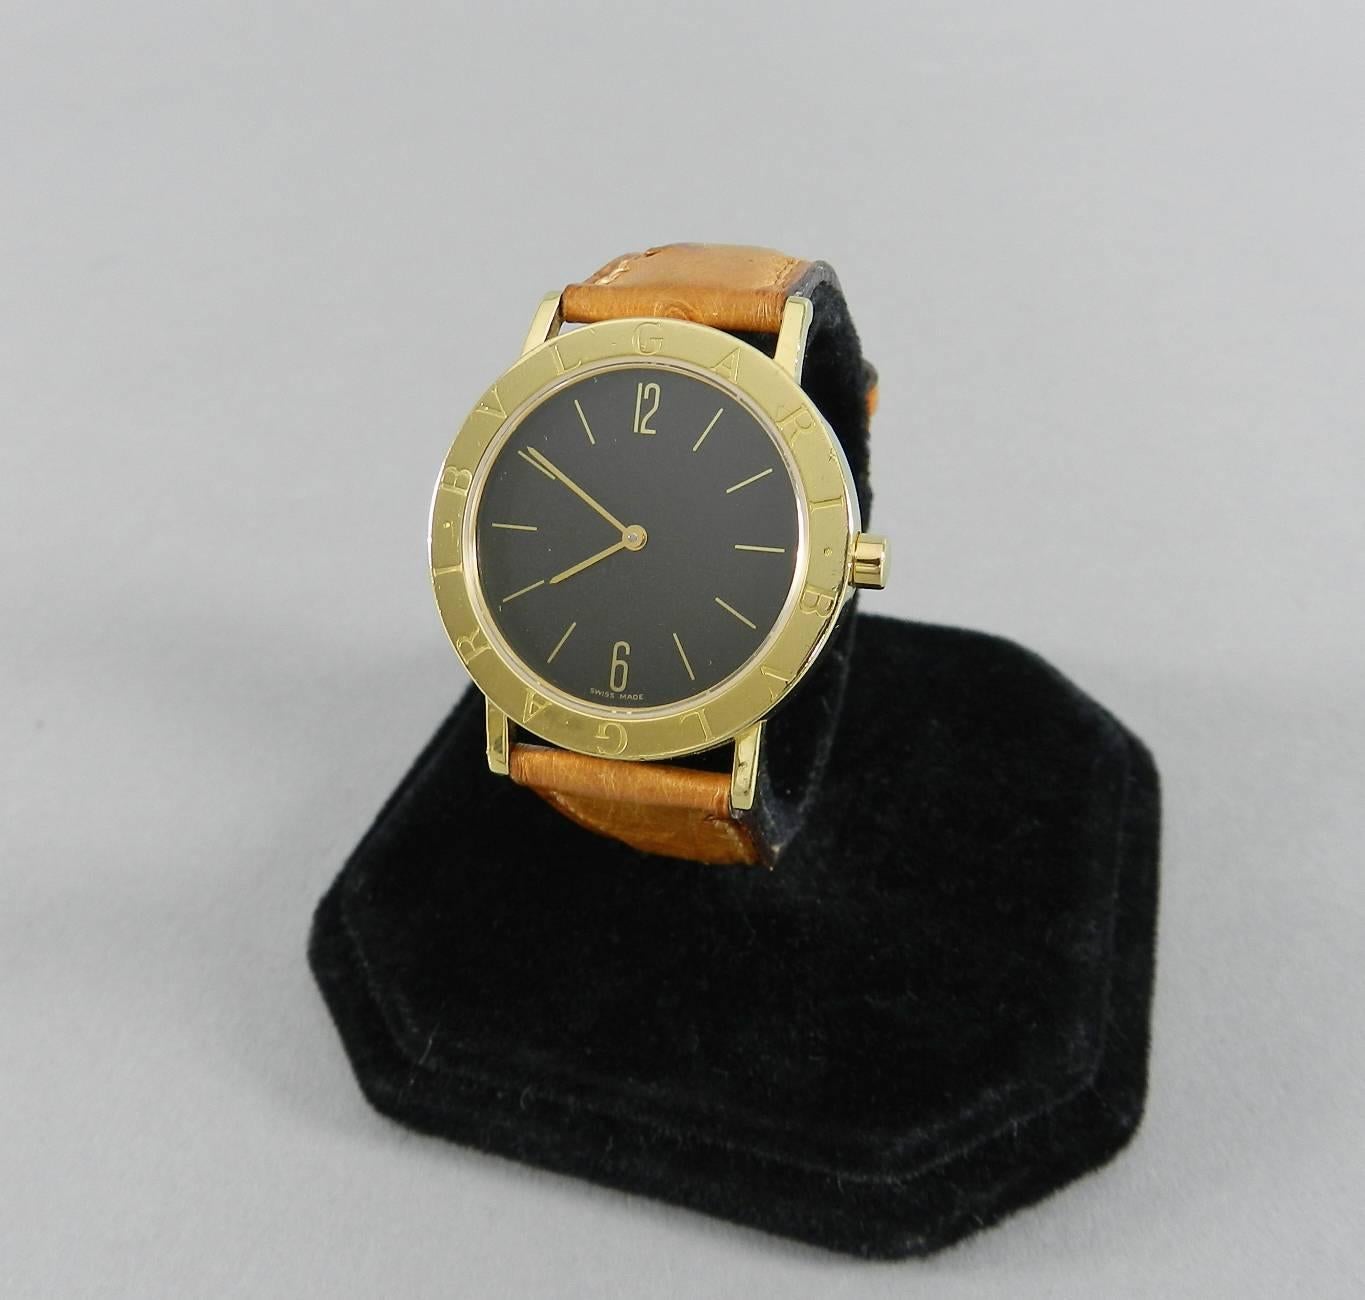 Bulgari 18k yellow gold watch.  Black face with gold hands and numbers. Style number BB33GL.  Quartz movement, 33mm case, hallmarked Bvlgari 750 on buckle. Tan ostrich band has been used a few times.  Beige and black crocodile bands that are brand